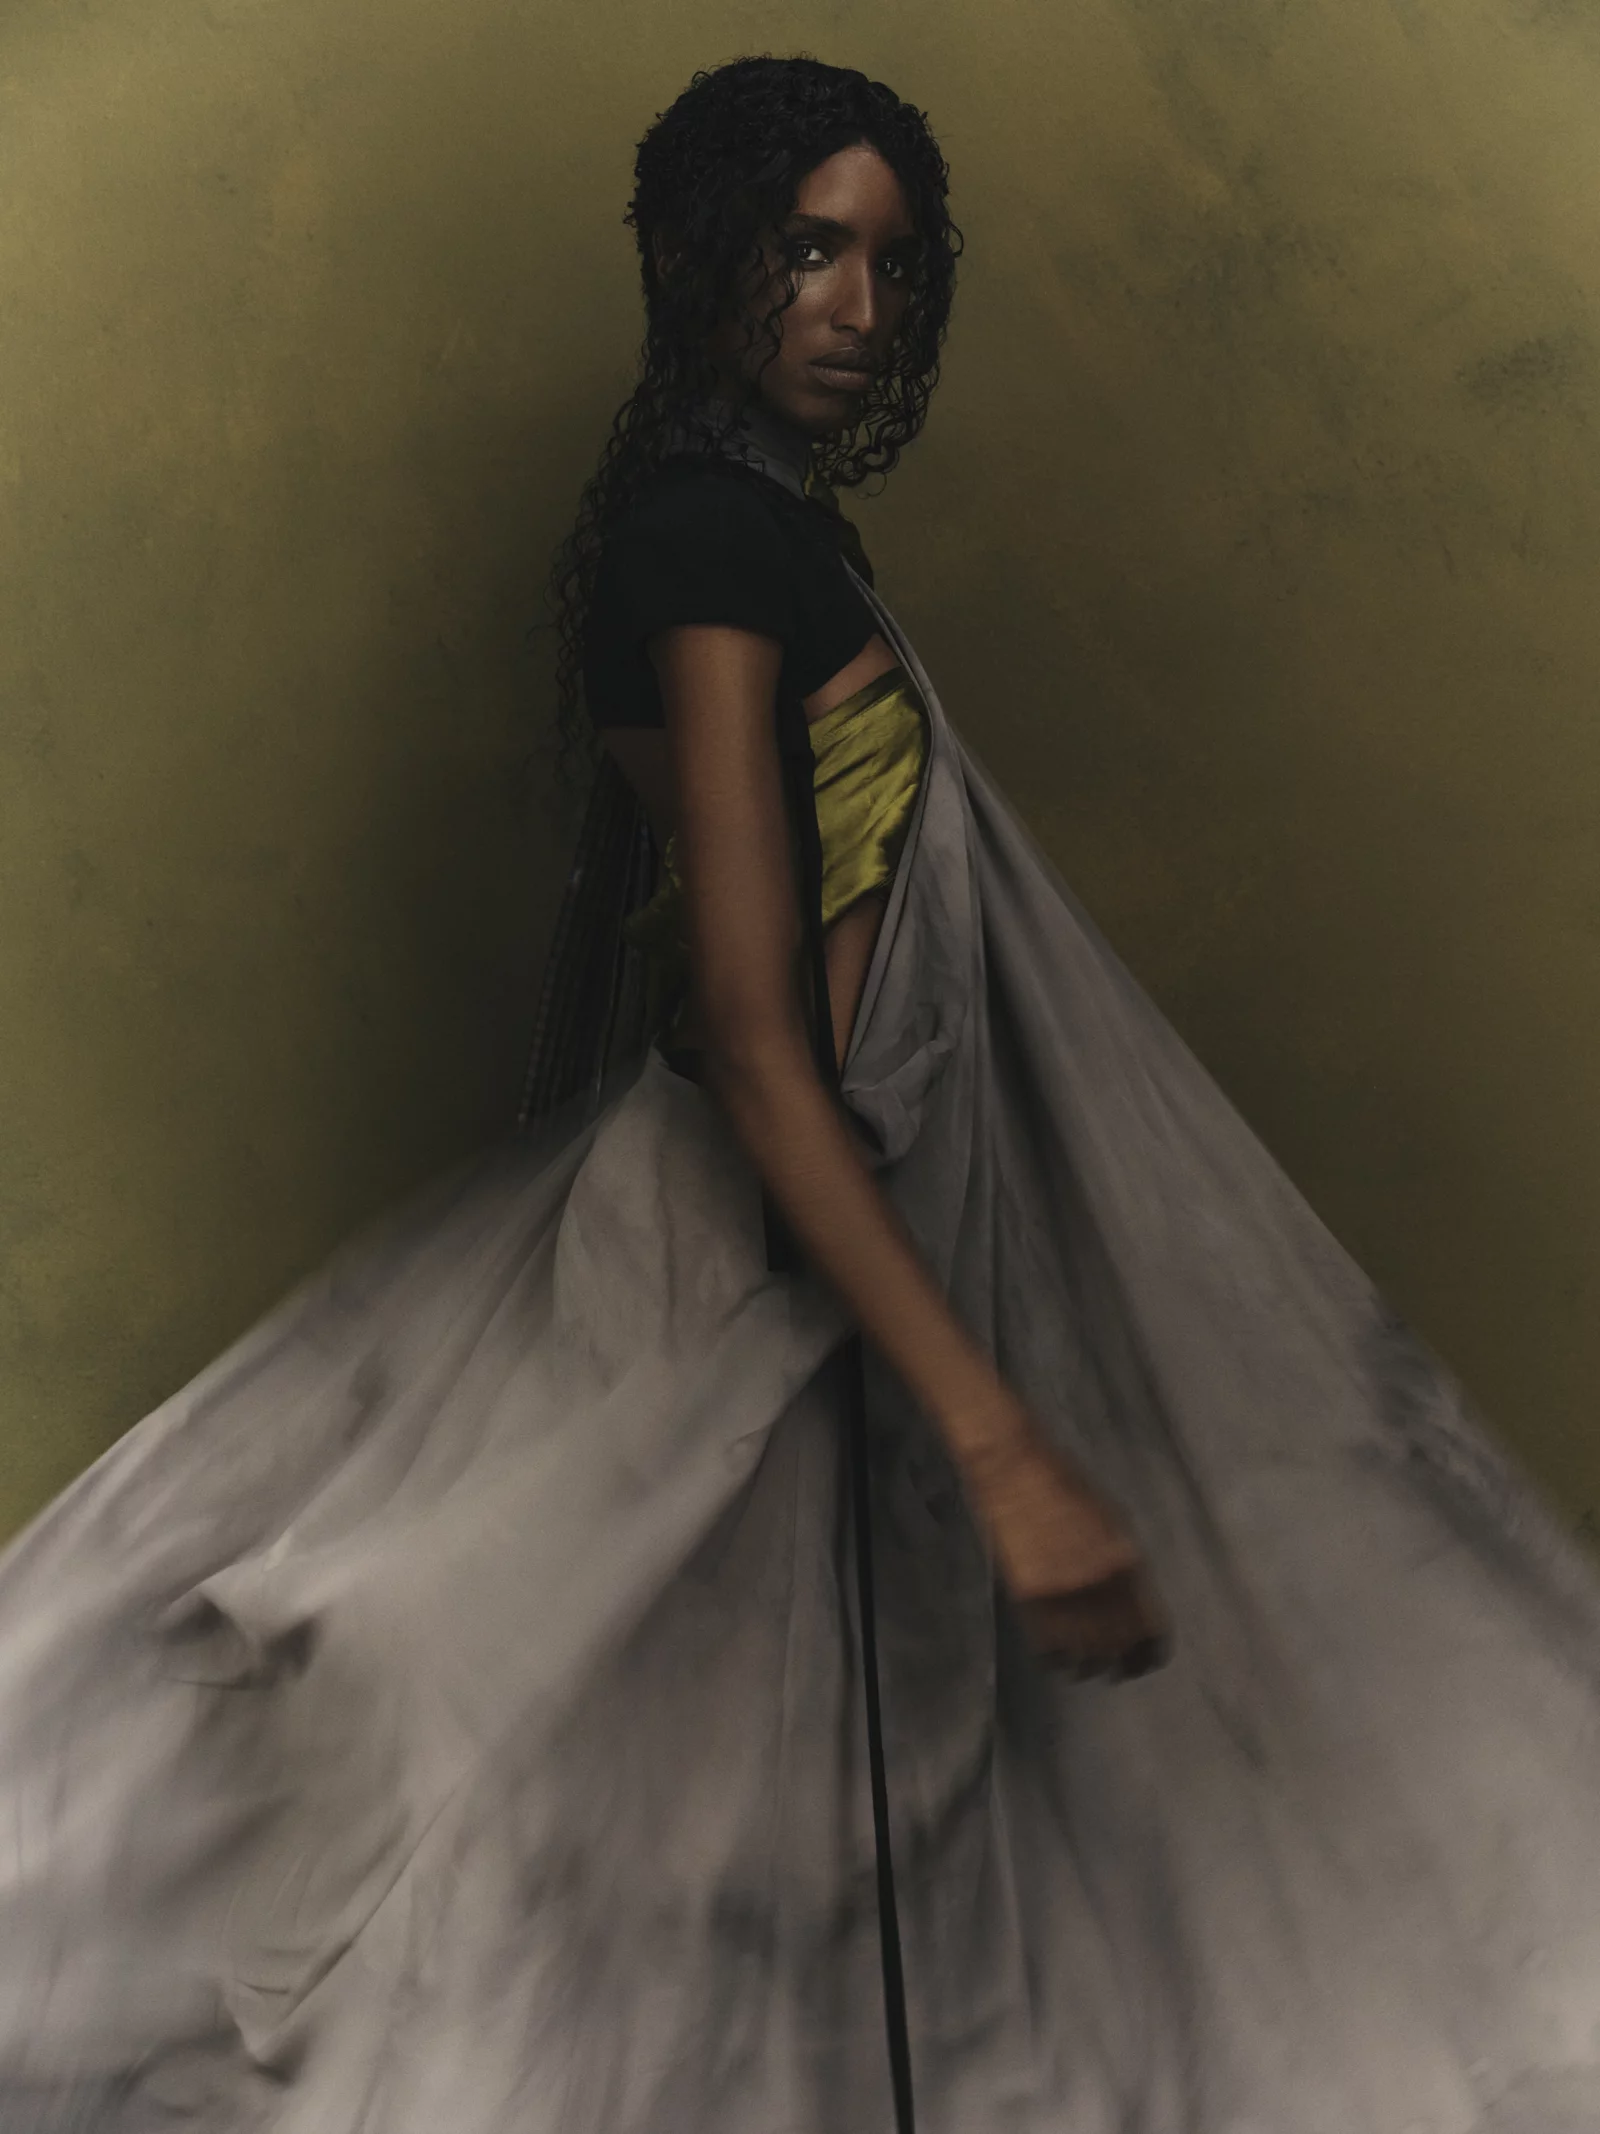 VOGUE Portugal 6 by Andreas ORTNER